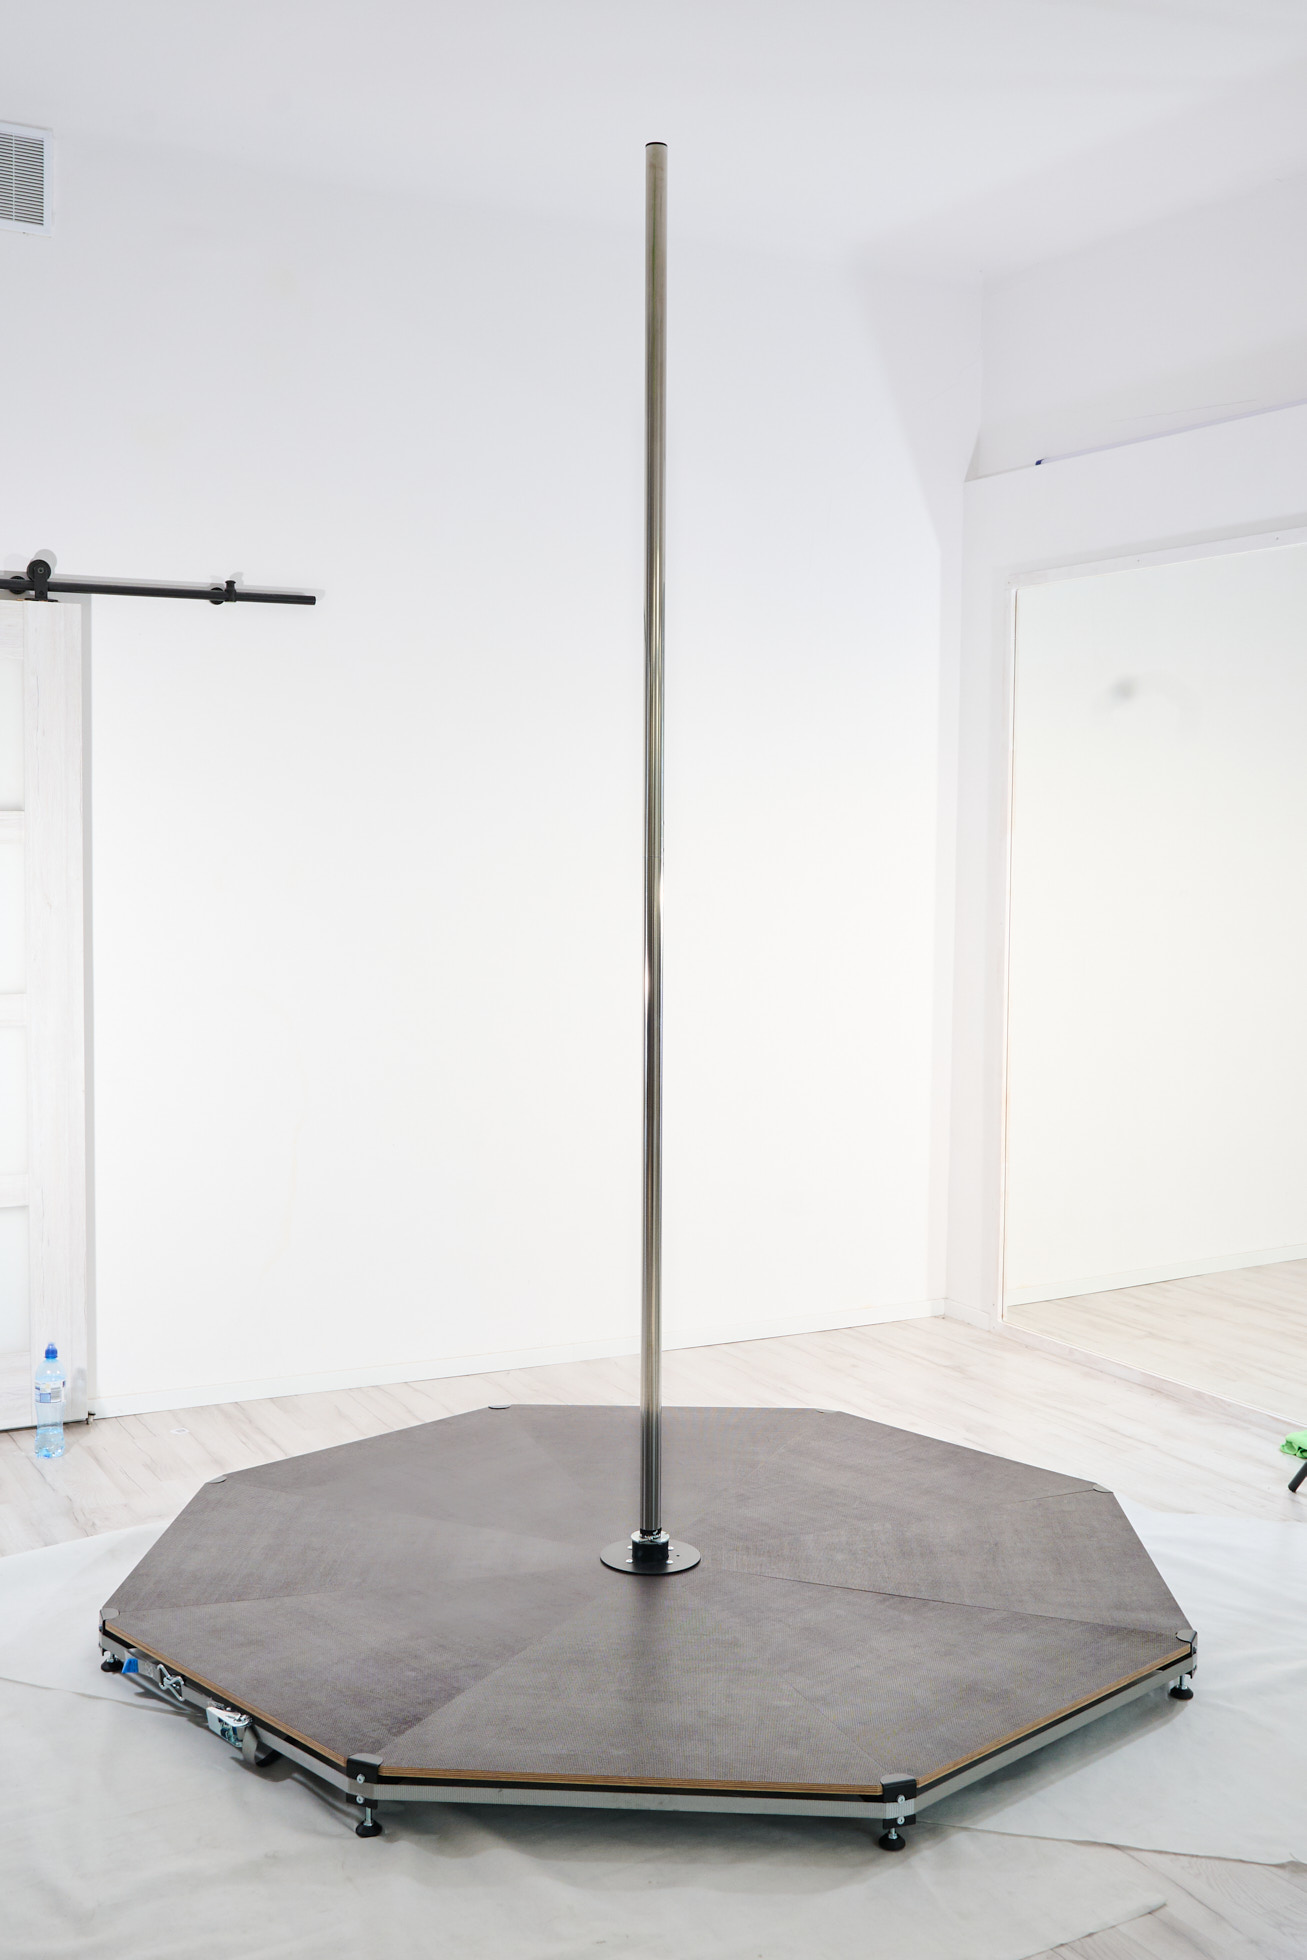 Get your portable dance pole from mPole